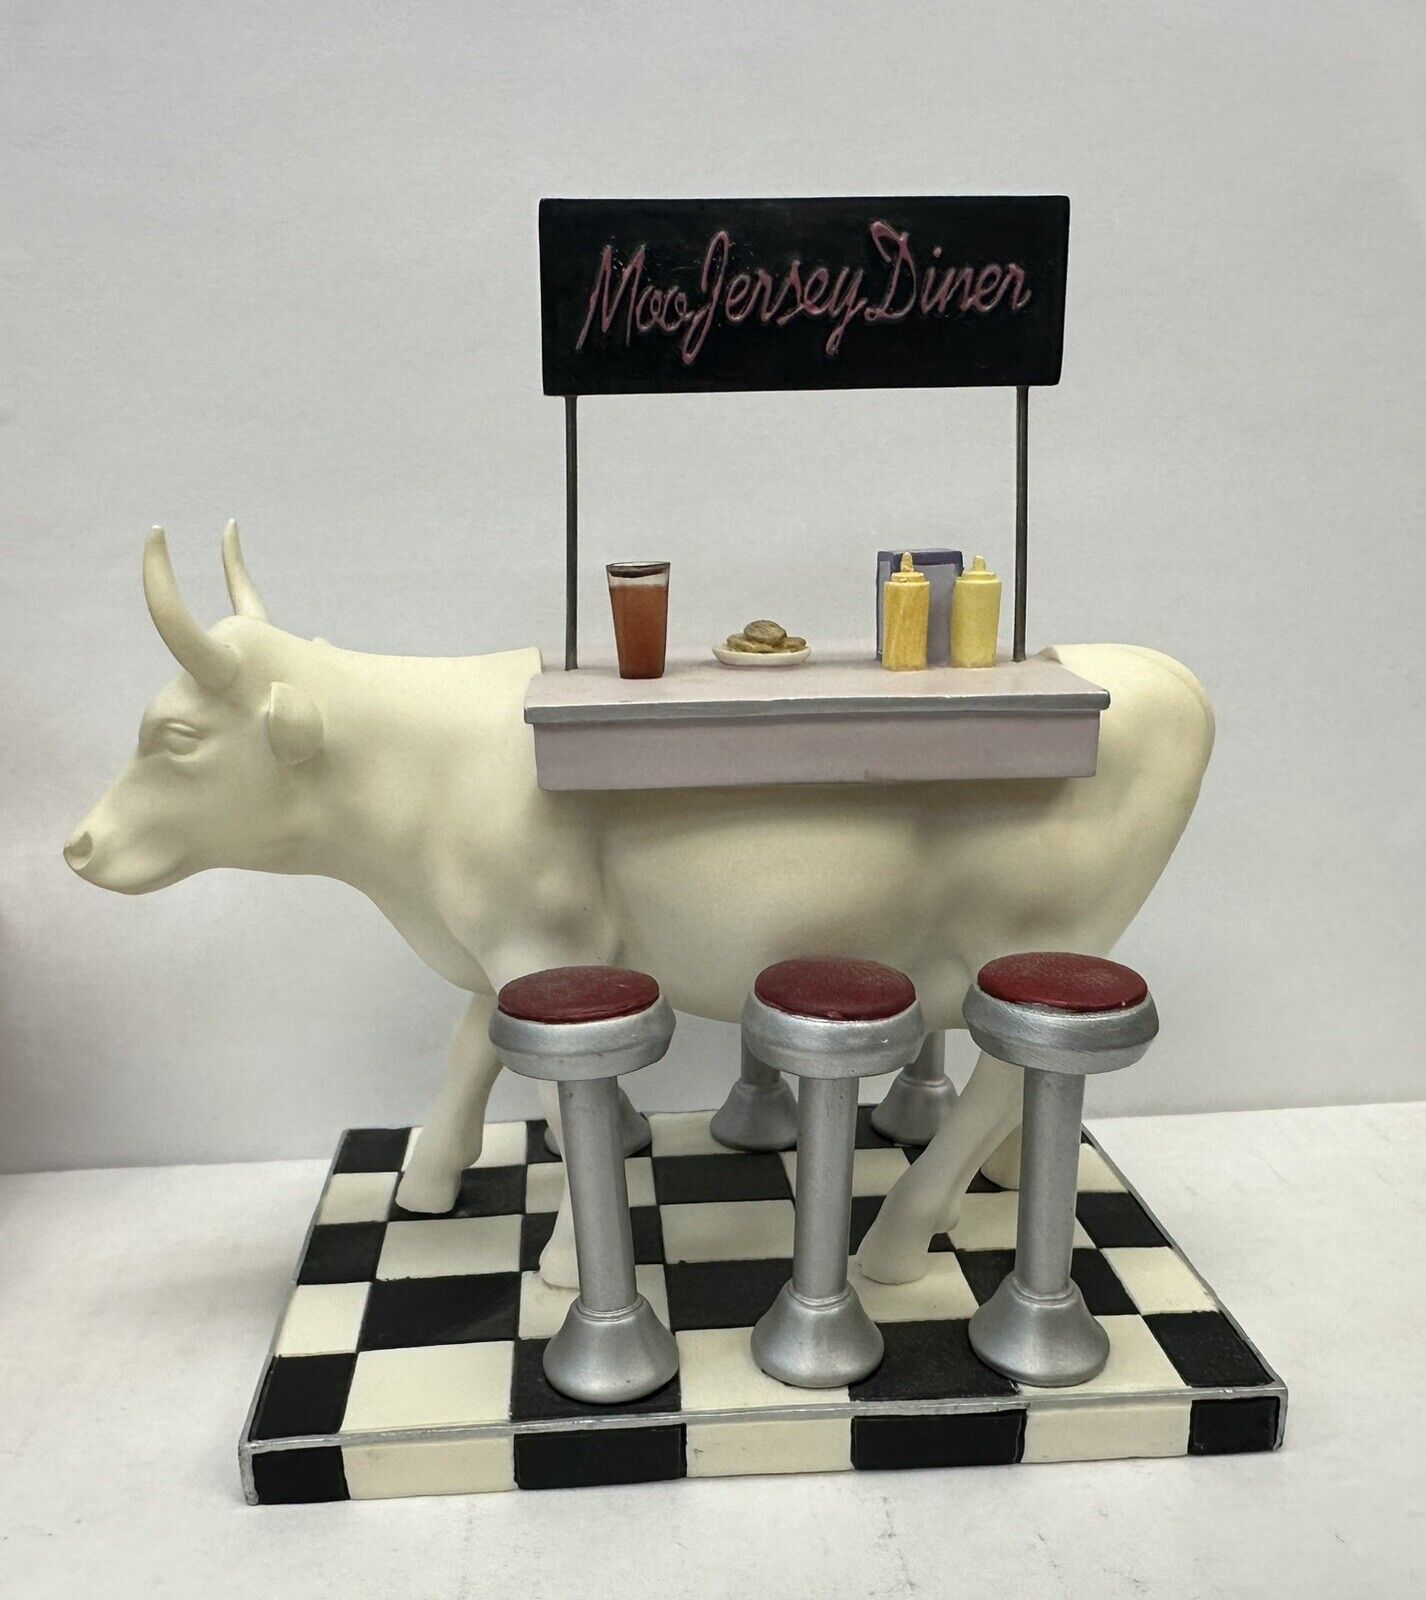 Cow Parade Moo Jersey Diner 6” Resin Figurine 9136 2001